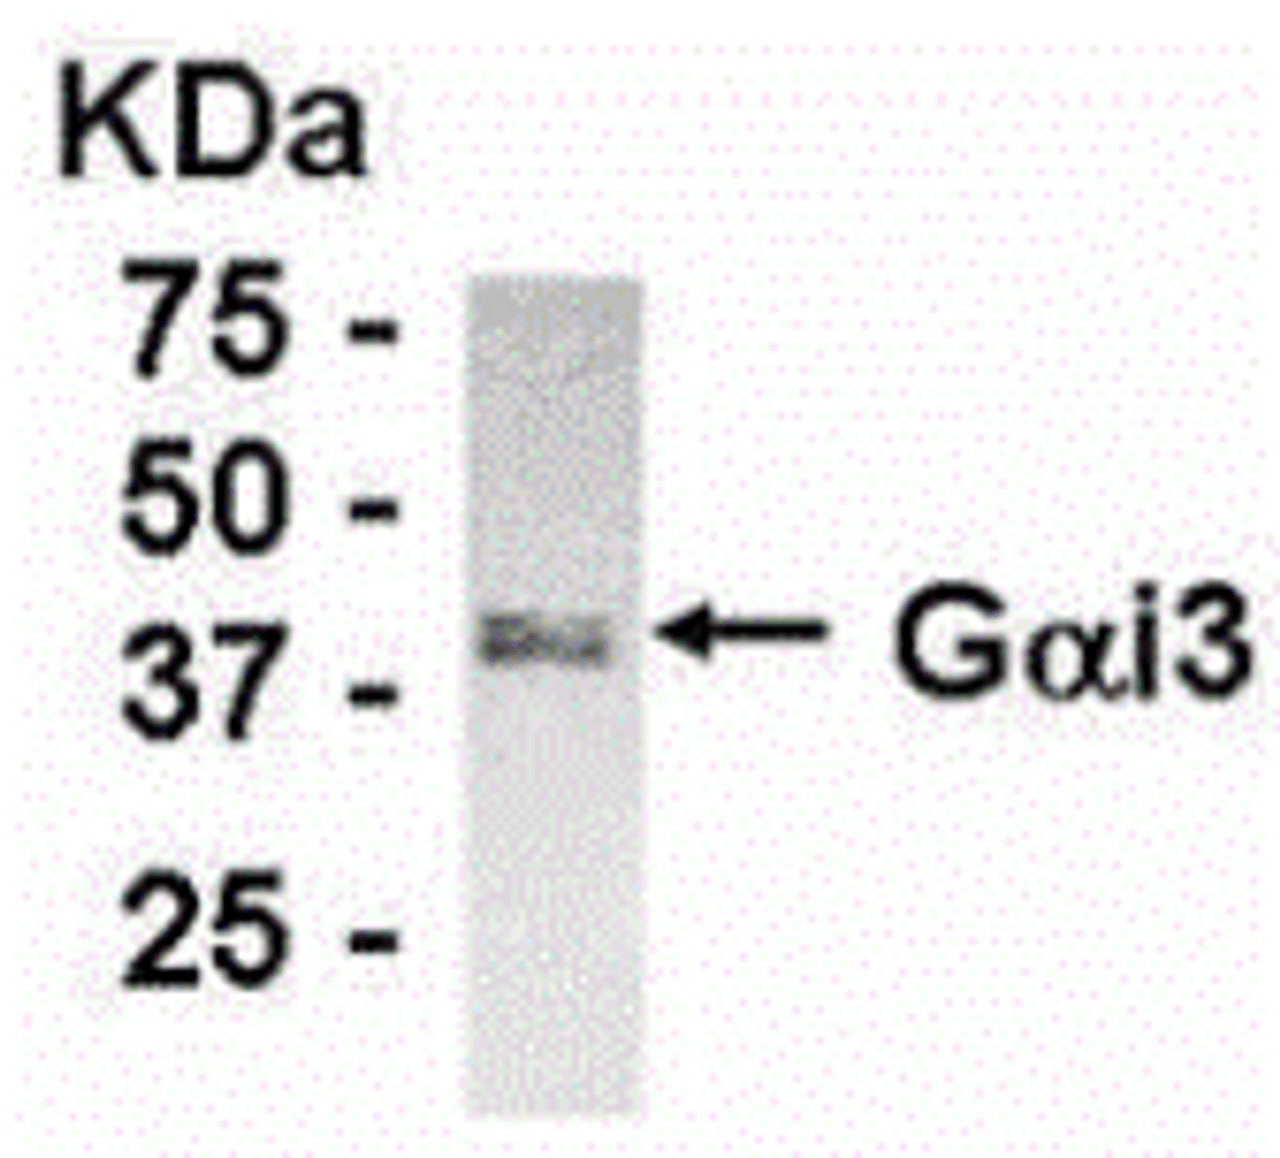 Western blot detection of endogenous Gai3 protein in normal rat kidney cell line. Anti-Gai3 IgY dilution: 1:1000; goat anti-IgY Fc-HRP: 1:10, 000.